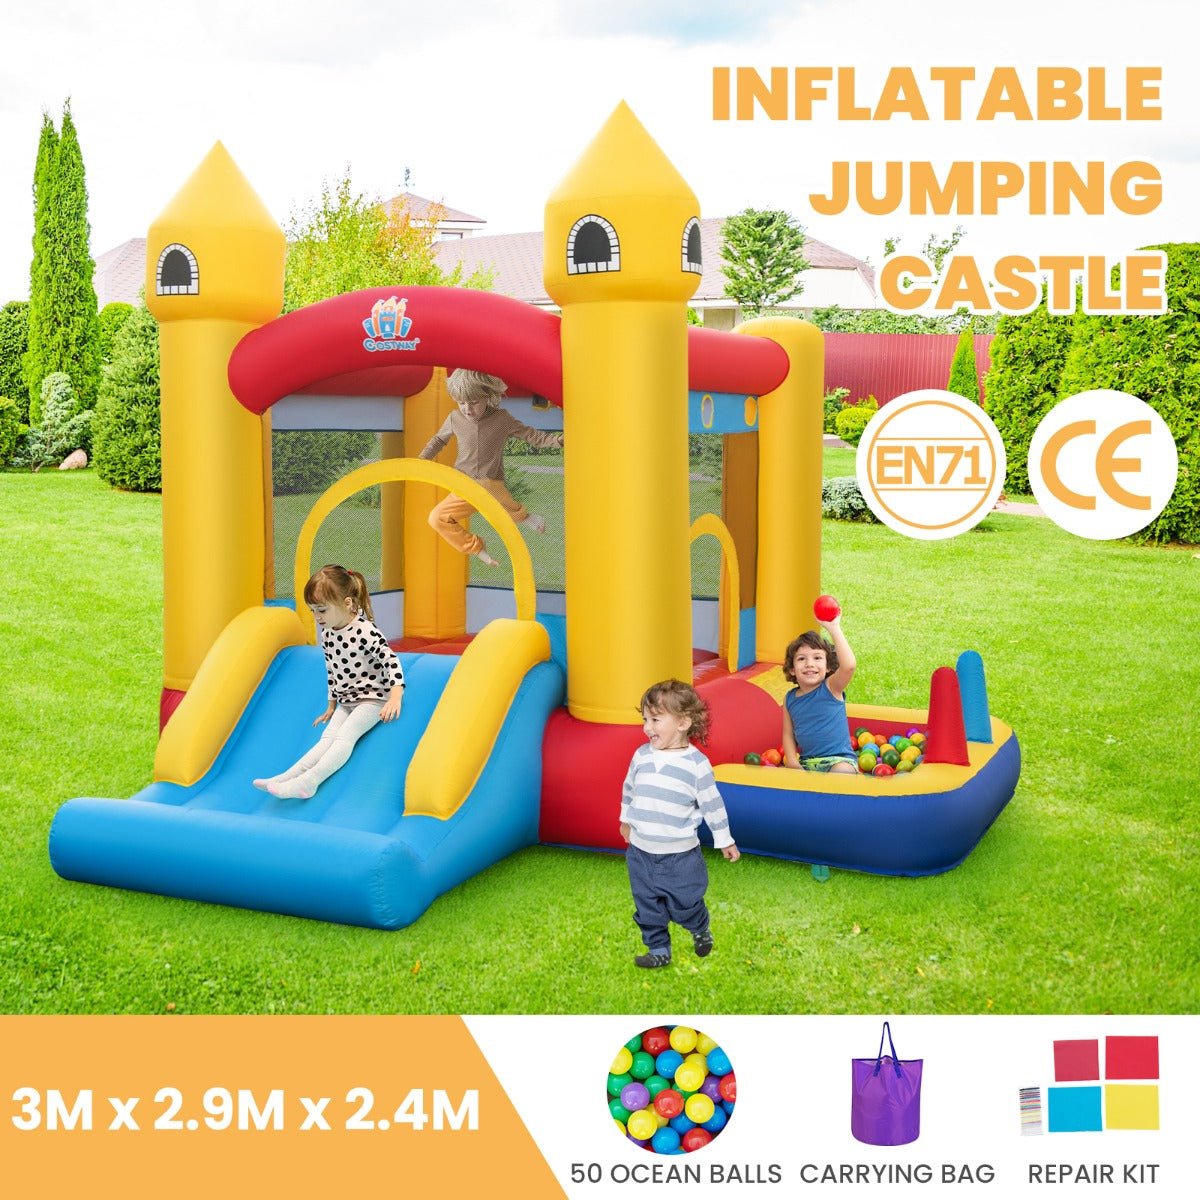 5-in-1 Inflatable Bounce Castle with Slide Ball Pit and Basketball Hoop